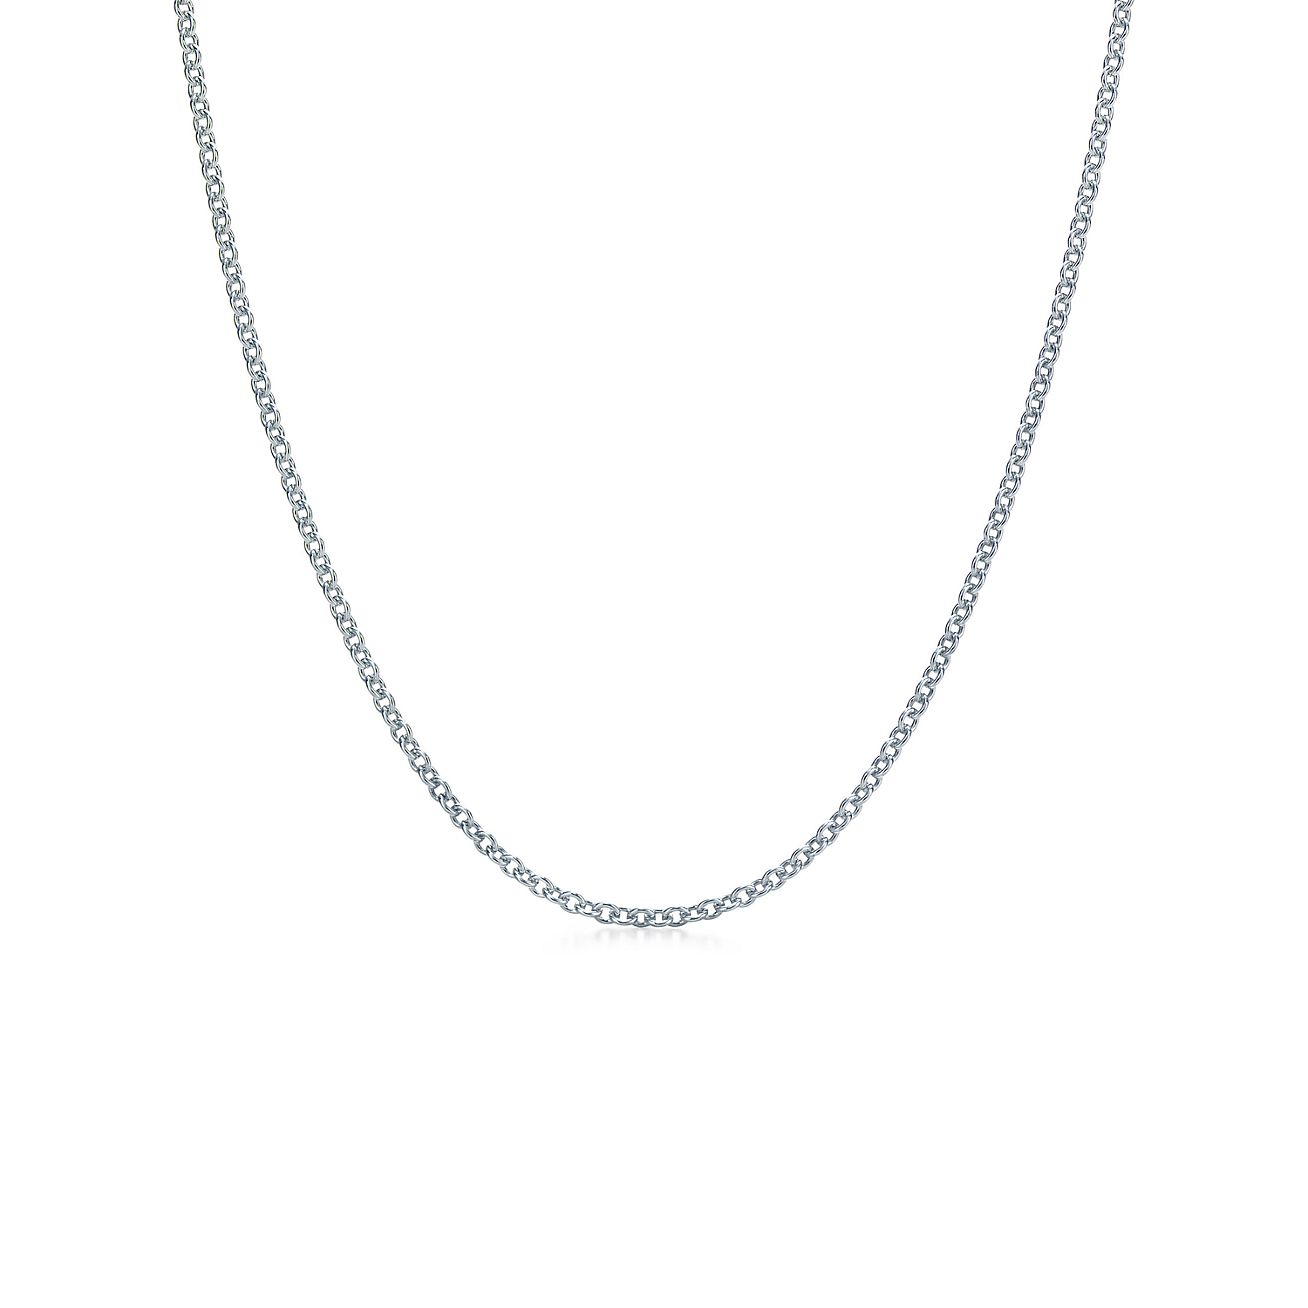 Large chain in sterling silver, 20 